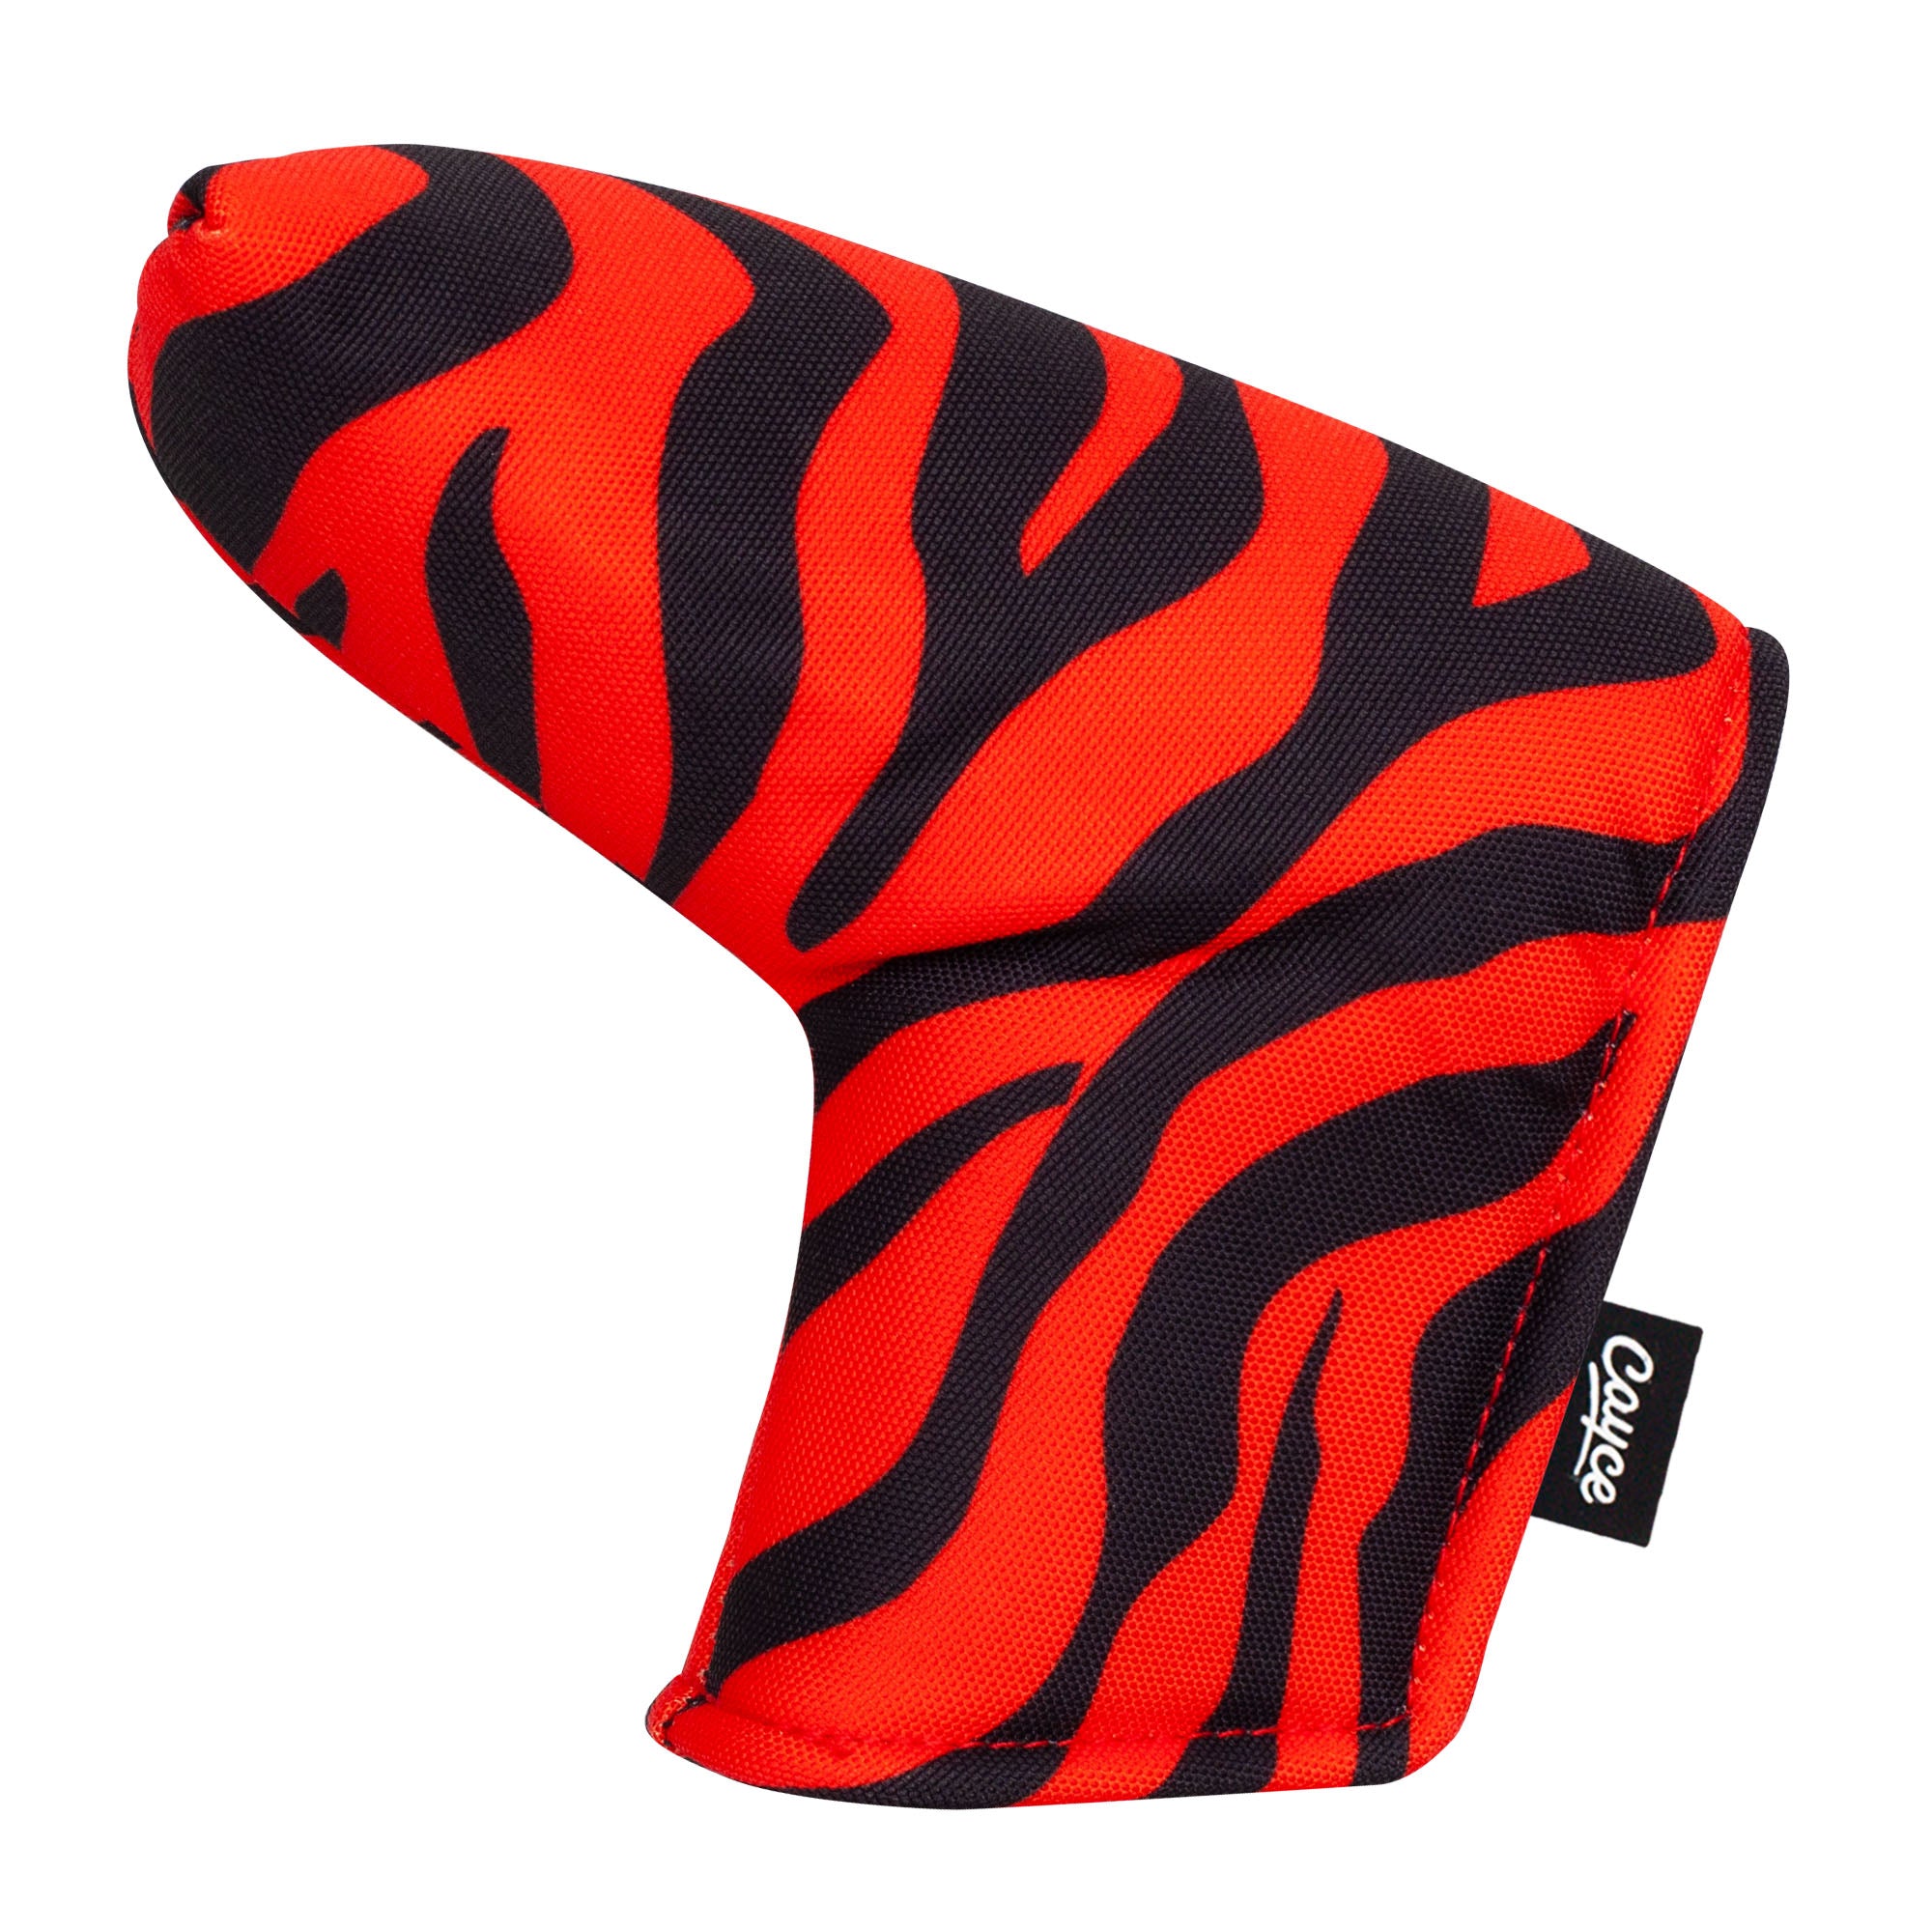 A bright, orange and black tiger-striped magnetic blade putter cover from Cayce Golf.